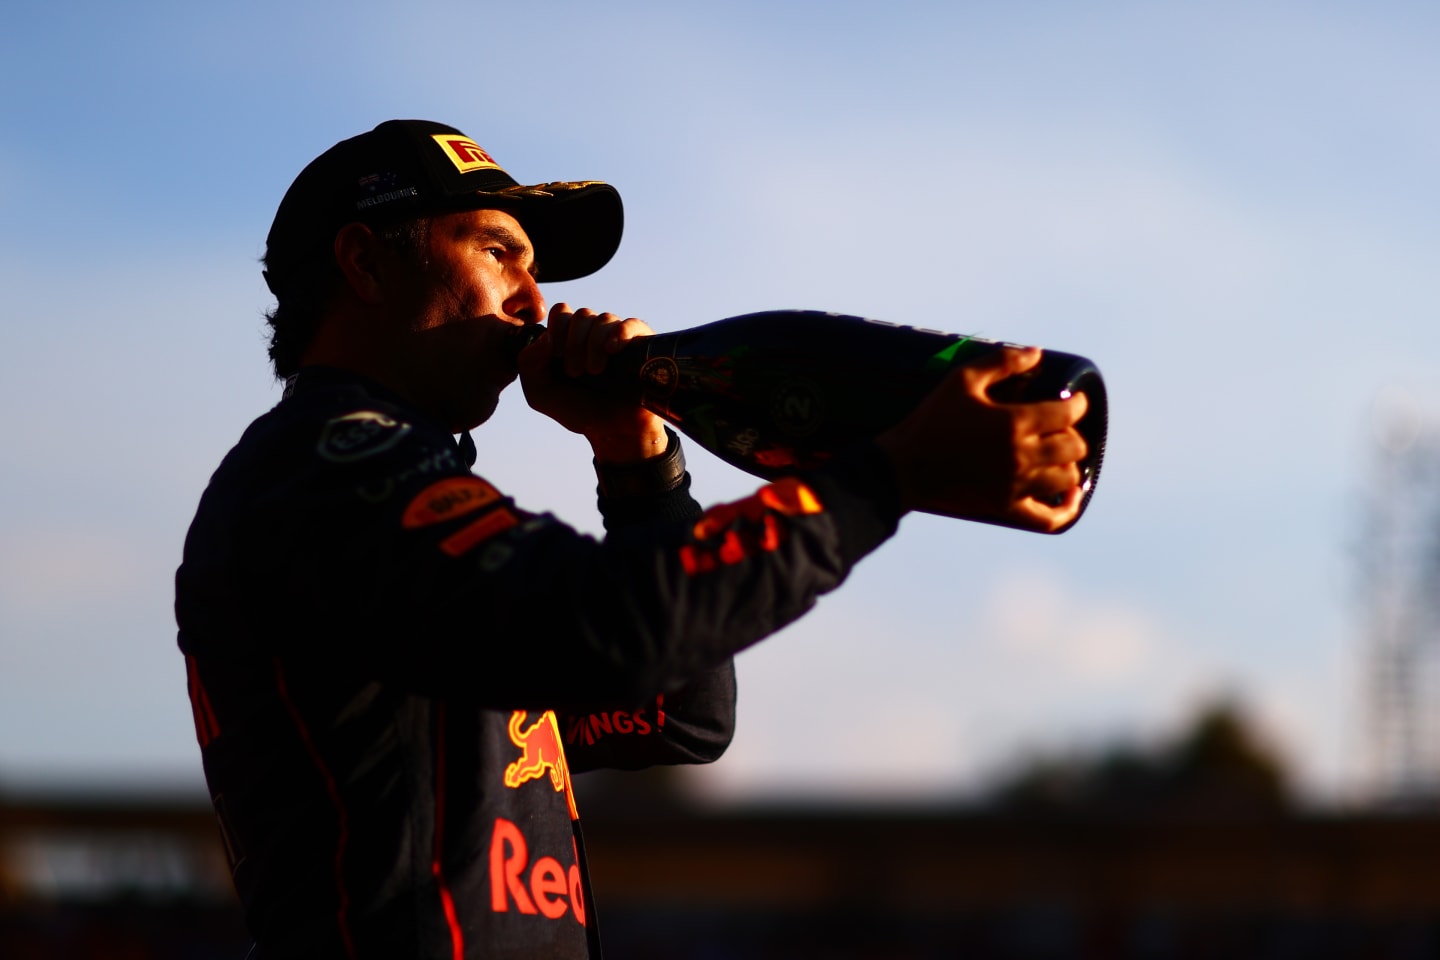 MELBOURNE, AUSTRALIA - APRIL 10: Second placed Sergio Perez of Mexico and Oracle Red Bull Racing celebrates on the podium during the F1 Grand Prix of Australia at Melbourne Grand Prix Circuit on April 10, 2022 in Melbourne, Australia. (Photo by Dan Istitene - Formula 1/Formula 1 via Getty Images)